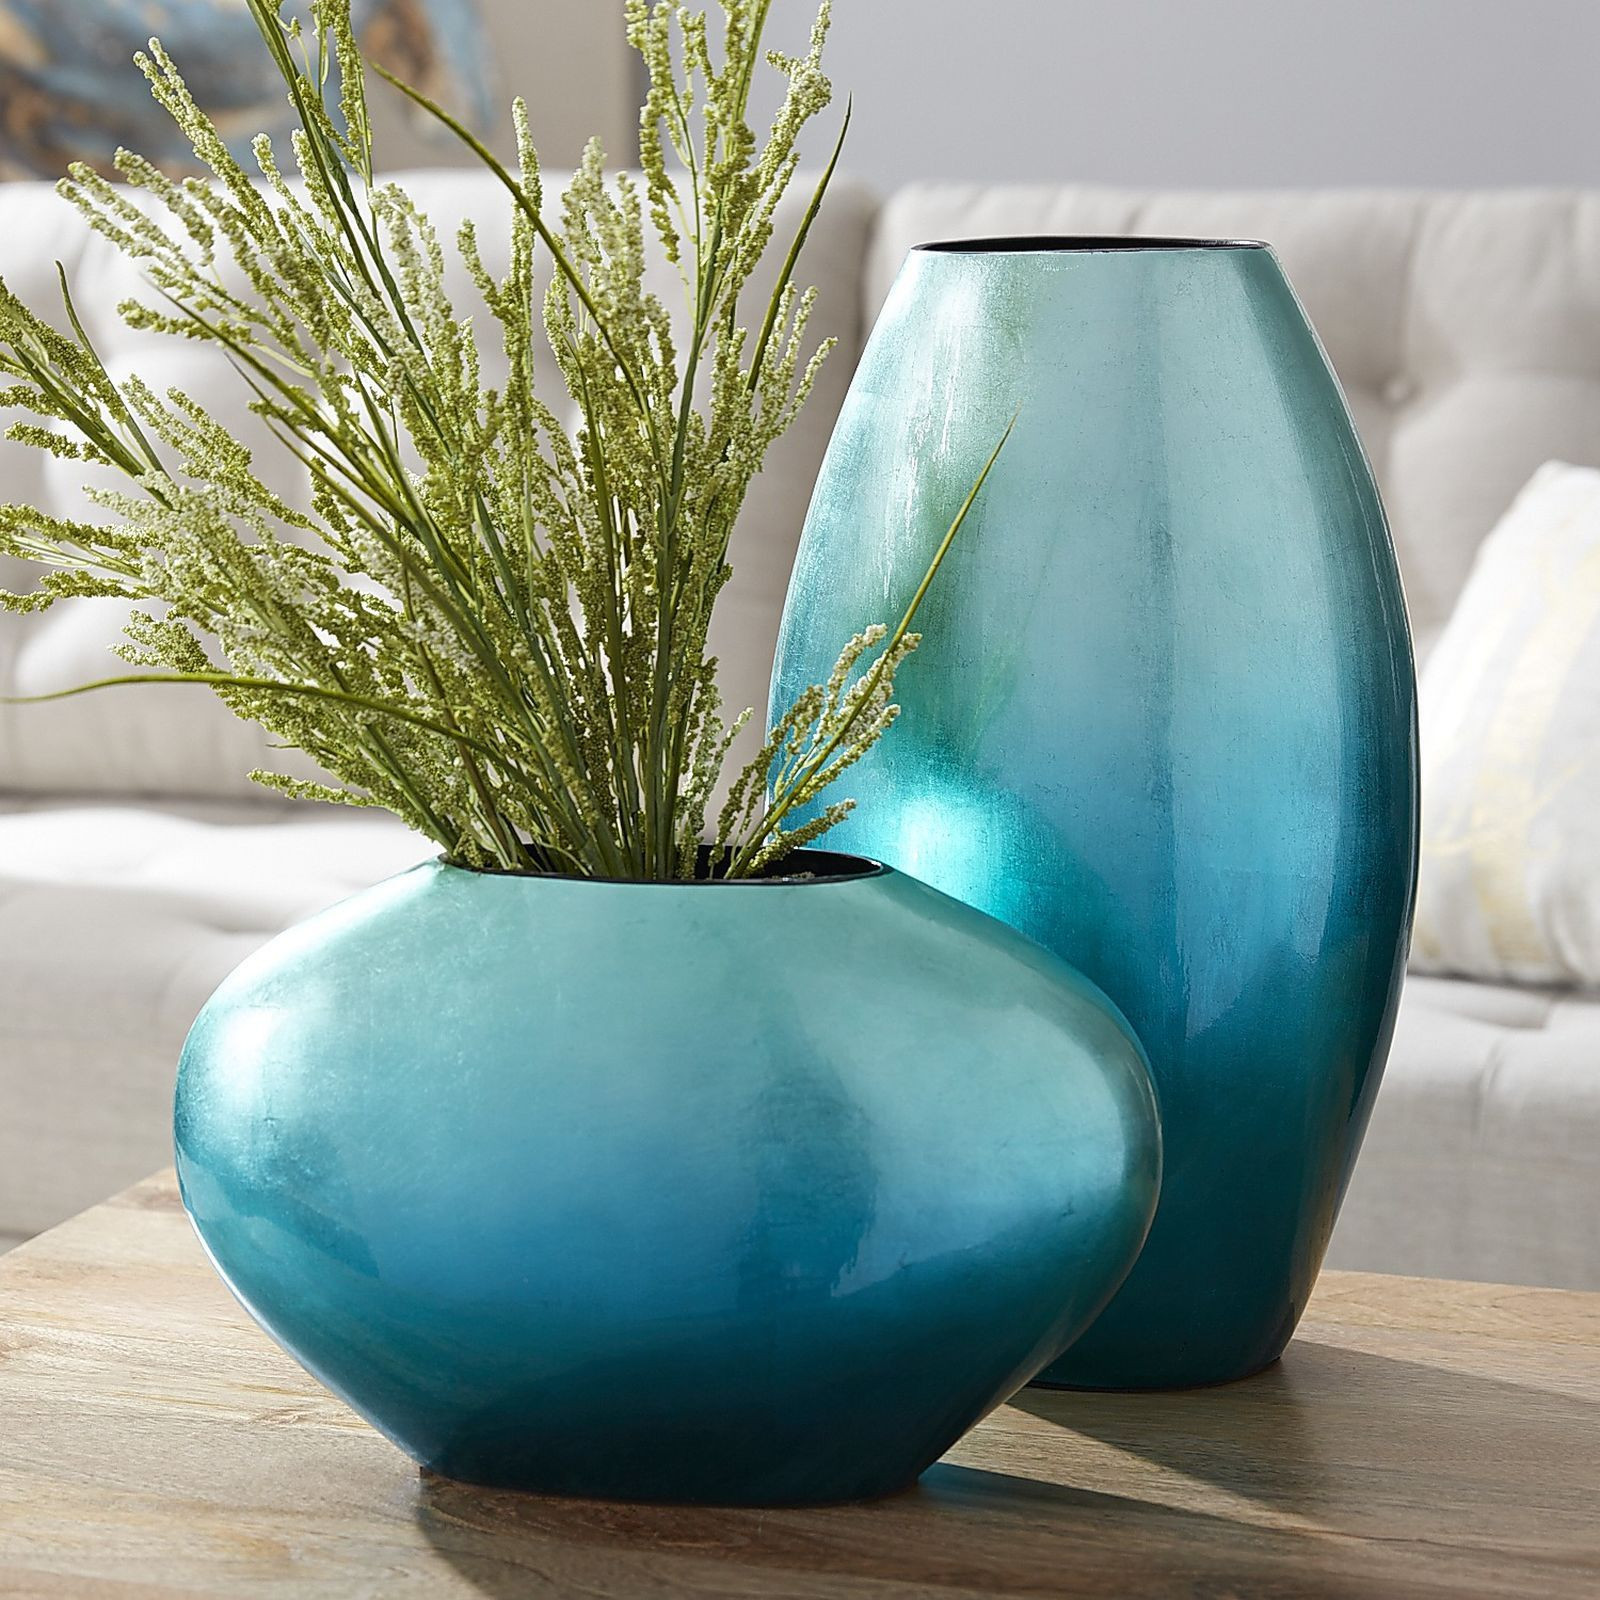 28 Unique Pier One Glass Vases 2024 free download pier one glass vases of pier 1 vases photos sinuous lines and iridescent color make these throughout pier 1 vases photos sinuous lines and iridescent color make these ceramic vases true